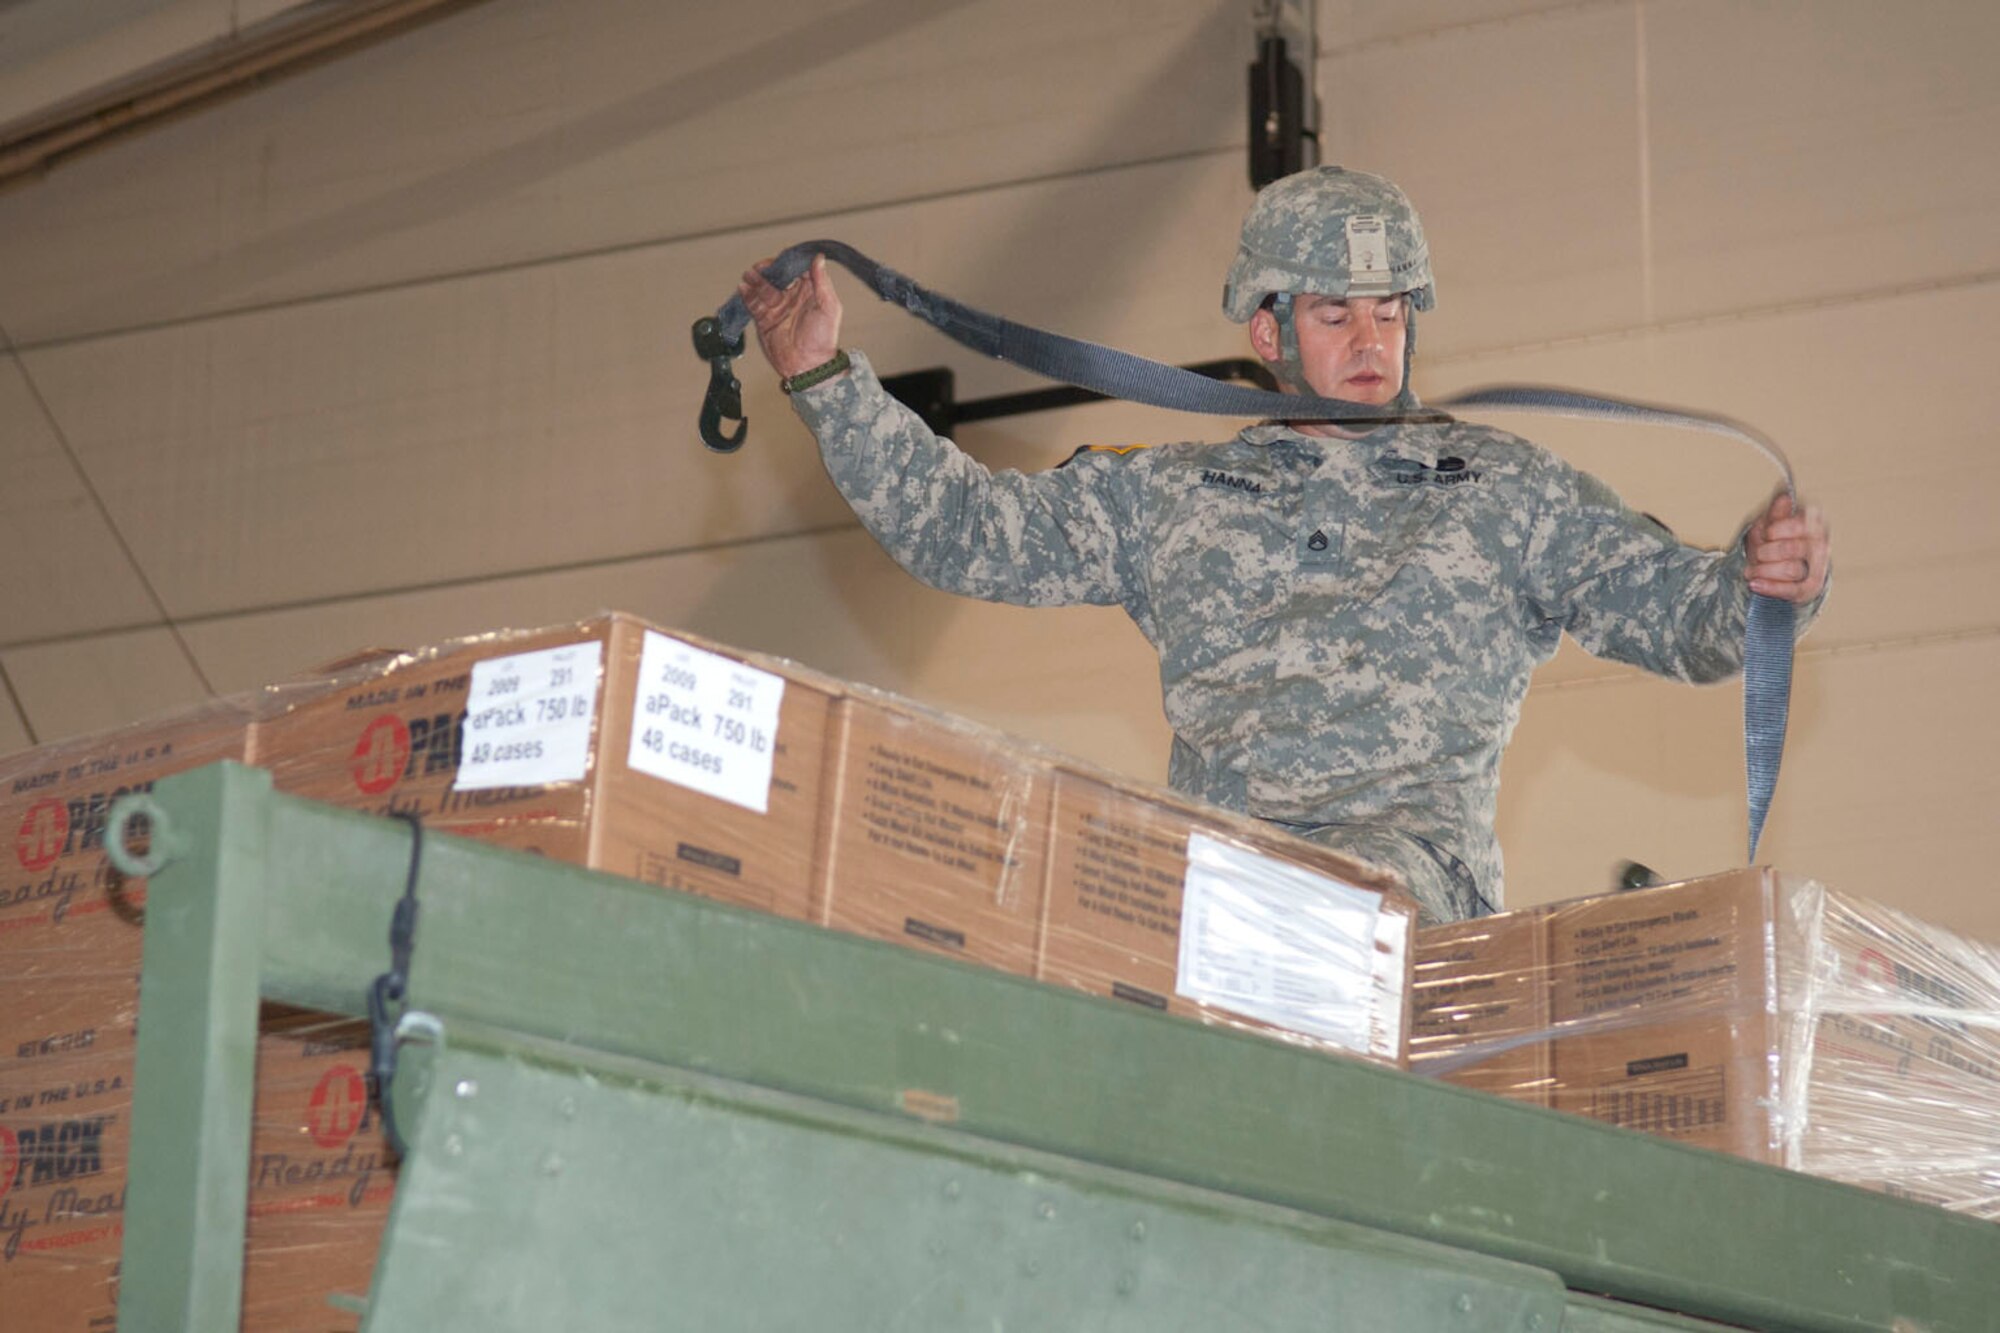 West Virginia National Guardsman, Staff Sgt. Robert Hanna, assigned to the 77th Brigade’s 201st Forward Support Company, straps down pallets of boxed ready-to-eat meals on a truck in a hangar at the 167th Airlift Wing, Martinsburg, W.Va., Nov.2, 2012. The truck was destined for Tucker County, W.Va., one of the W.Va. counties with heavy snow and power outages. The 167th AW is serving as a staging area for disaster relief supplies which will then be transported throughout West Virginia as needed. The West Virginia National Guard has over 200 members aiding in recovery efforts from Hurricane Sandy.  The storm blanketed the state with heavy snow and rains and also had severe winds that left homes and properties damaged.  Guardsmen are involved in numerous aspects of the operations from search and rescue missions to debris removal. (Air National Guard photo by Master Sgt. Emily Beightol-Deyerle)